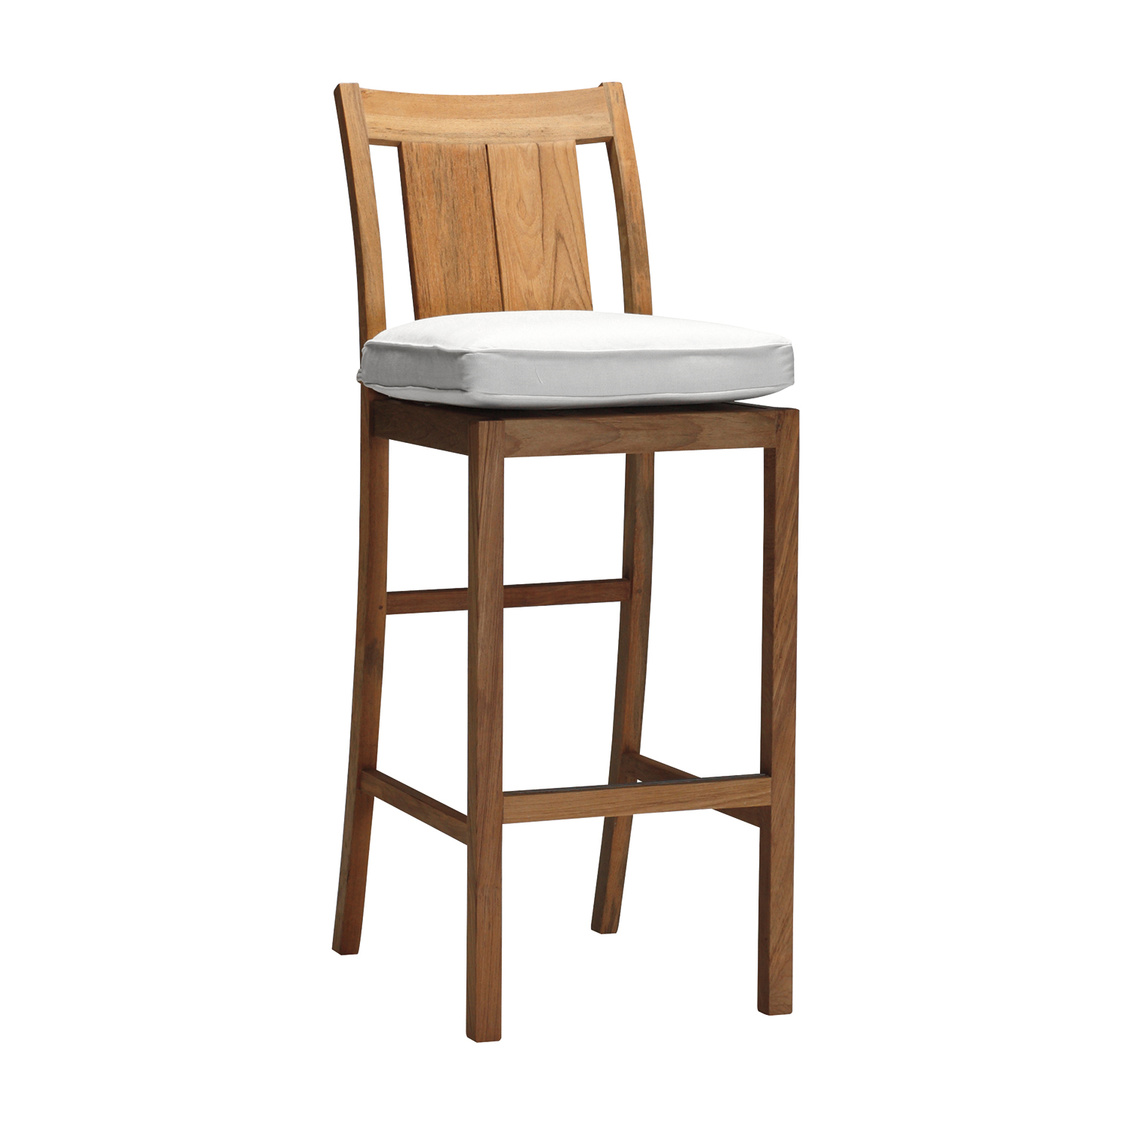 30 inch croquet teak bar stool in natural teak – frame only product image